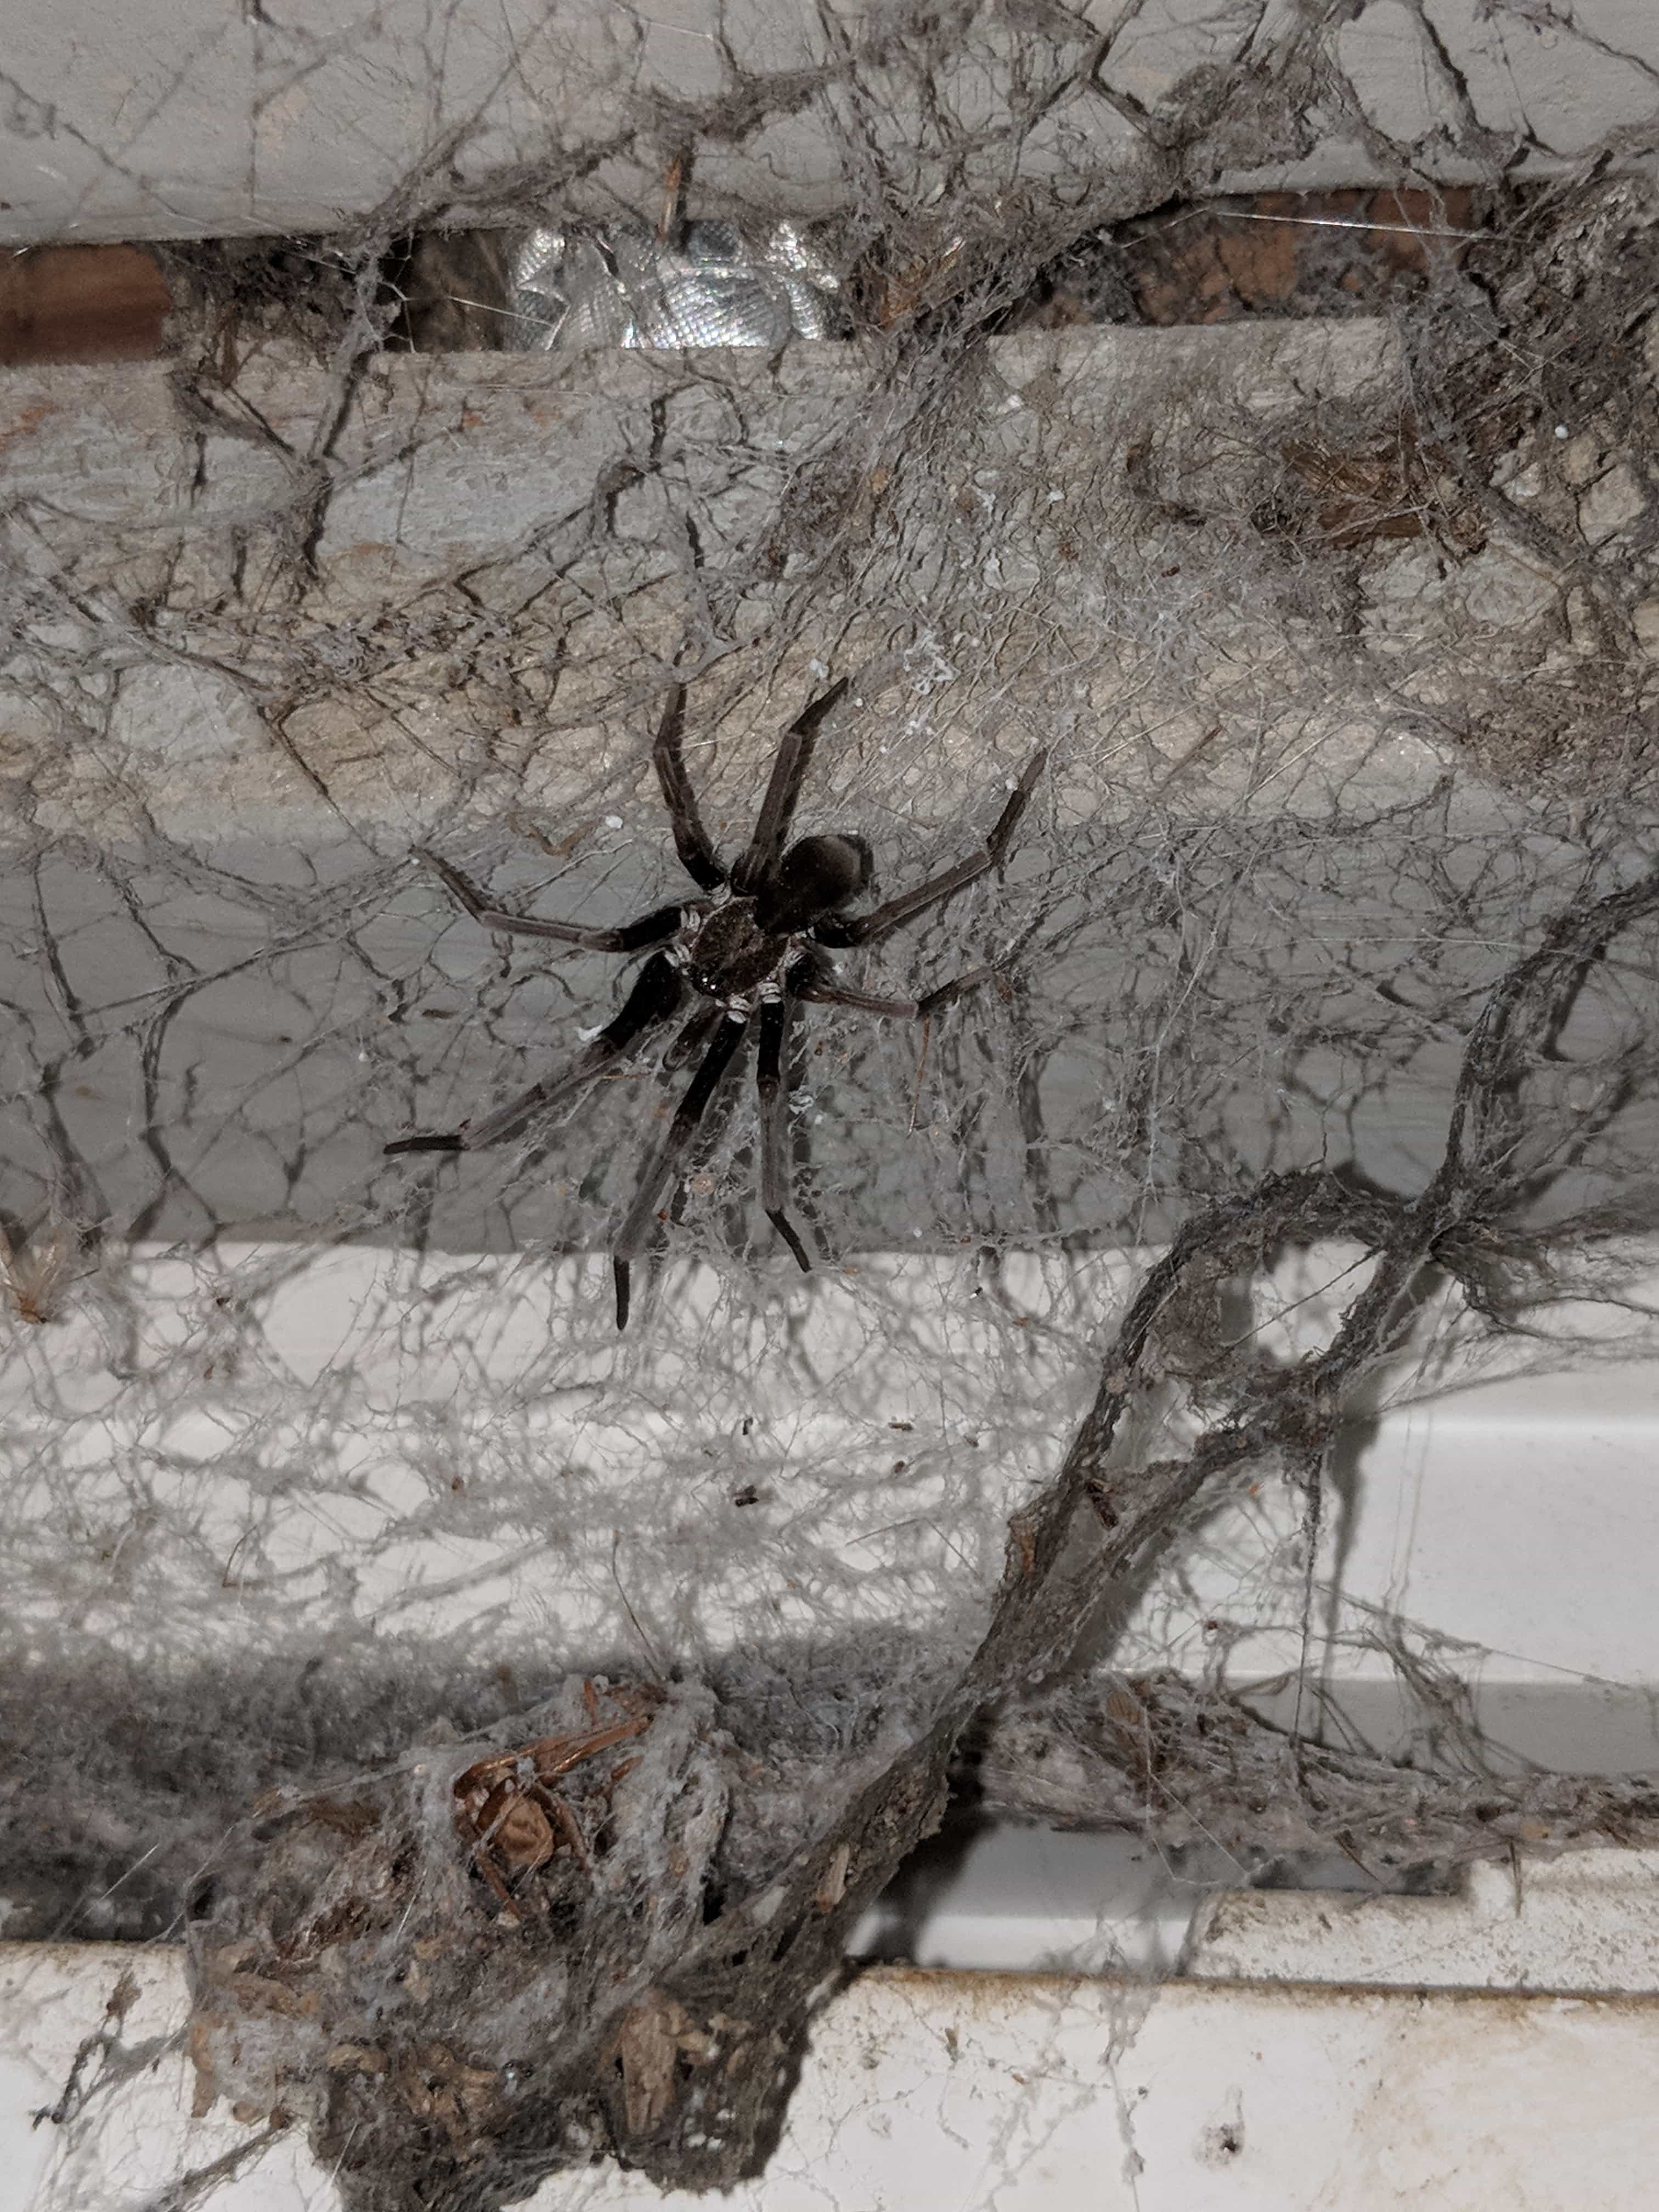 Picture of Kukulcania hibernalis (Southern House Spider) - Female - Dorsal,Webs